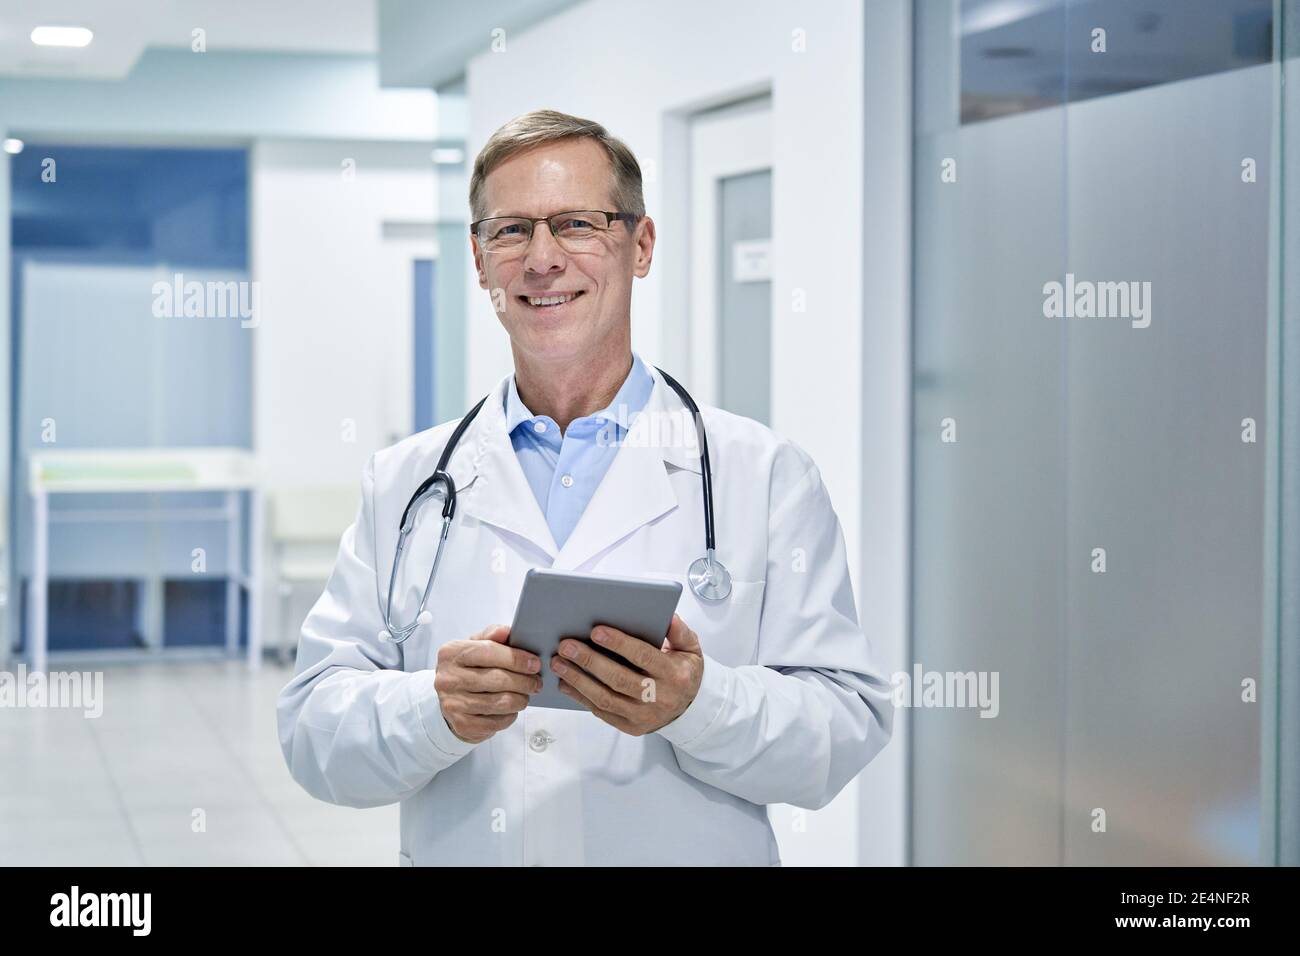 Smiling old middle aged doctor using digital tablet standing in hospital. Stock Photo